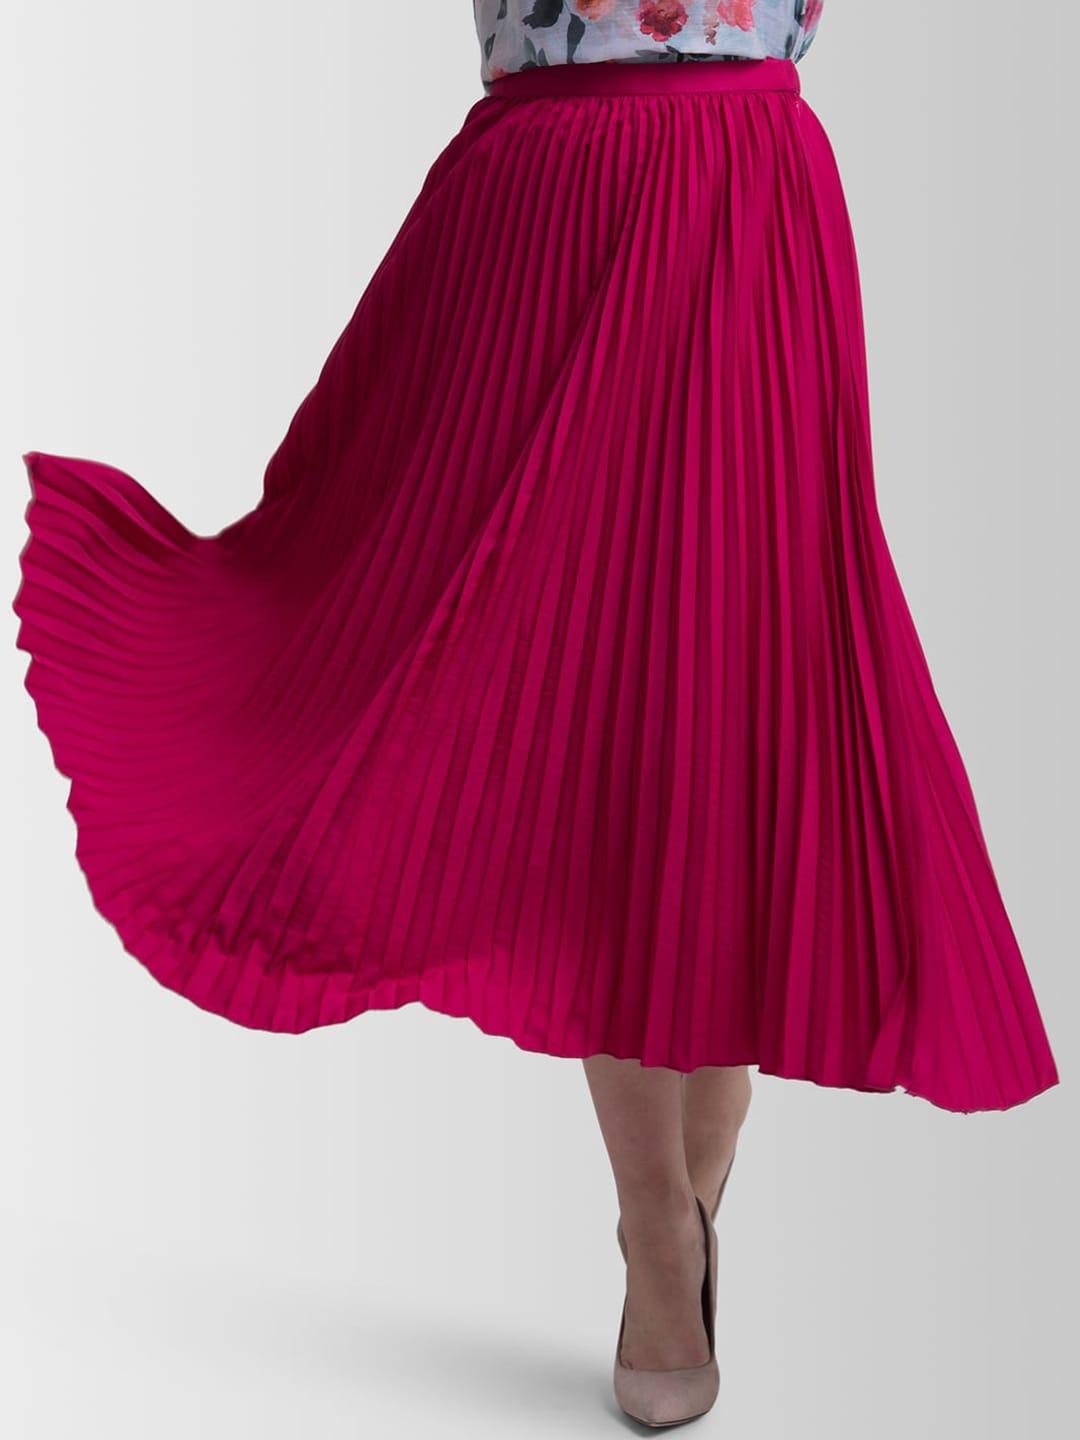 FableStreet Fuchsia Pink Accordian Pleated Flared Skirt